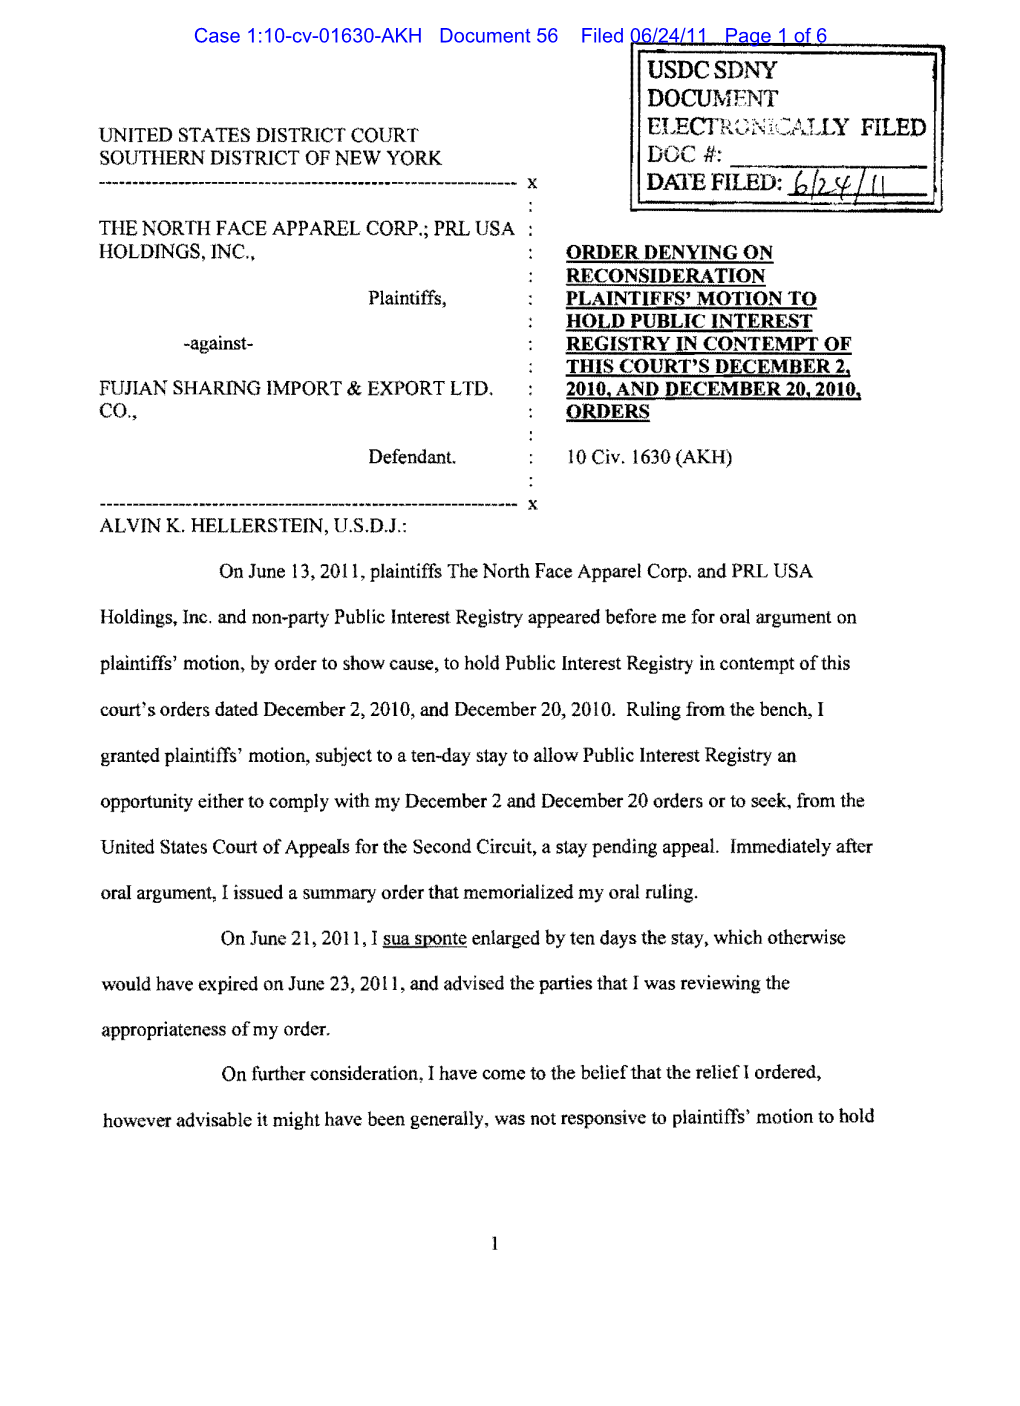 Case 1:10-Cv-01630-AKH Document 56 Filed 06/24/11 Page 1 of 6